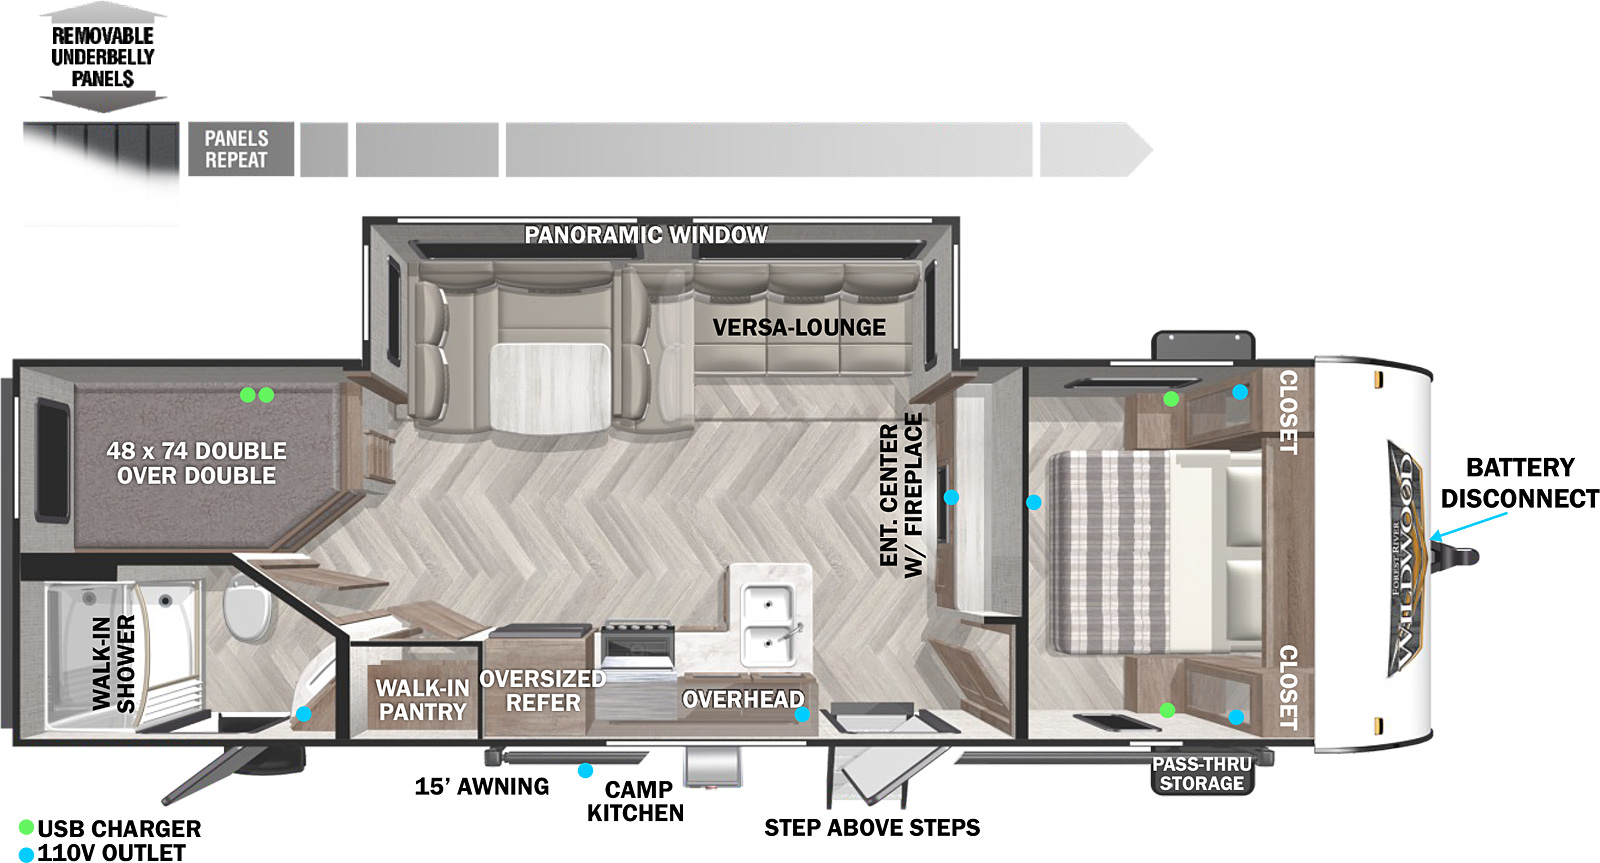 The 263BHXL is a bunk house travel trailer. This floorplan has 48 x 74 double over double bunks in the back. Next to the bunks is the bathroom that features a walk-in shower, sink, toilet, and second entry access. The main access is towards the middle front of the unit and allows one to enter right next to the door of the bedroom. The bedroom is in the front of the floorplan and has closets besides the bed with CPAP storage. There is more storage below the bed. In the main section of the floorplan there is a super-slide that includes the dinette and Versa-Lounge. The Versa-Lounge offers the option of an 8 foot chaise lounge or normal sofa and U-dinette set-up. The entertainment center is next to the the slide-out. The entertainment center includes an electric fireplace, a soundbar, and prep for a TV mount. The kitchen is on the camp side of the floorplan. The kitchen includes a walk-in pantry, refrigerator, large kitchen window, over, microwave, sink, and tons of storage.